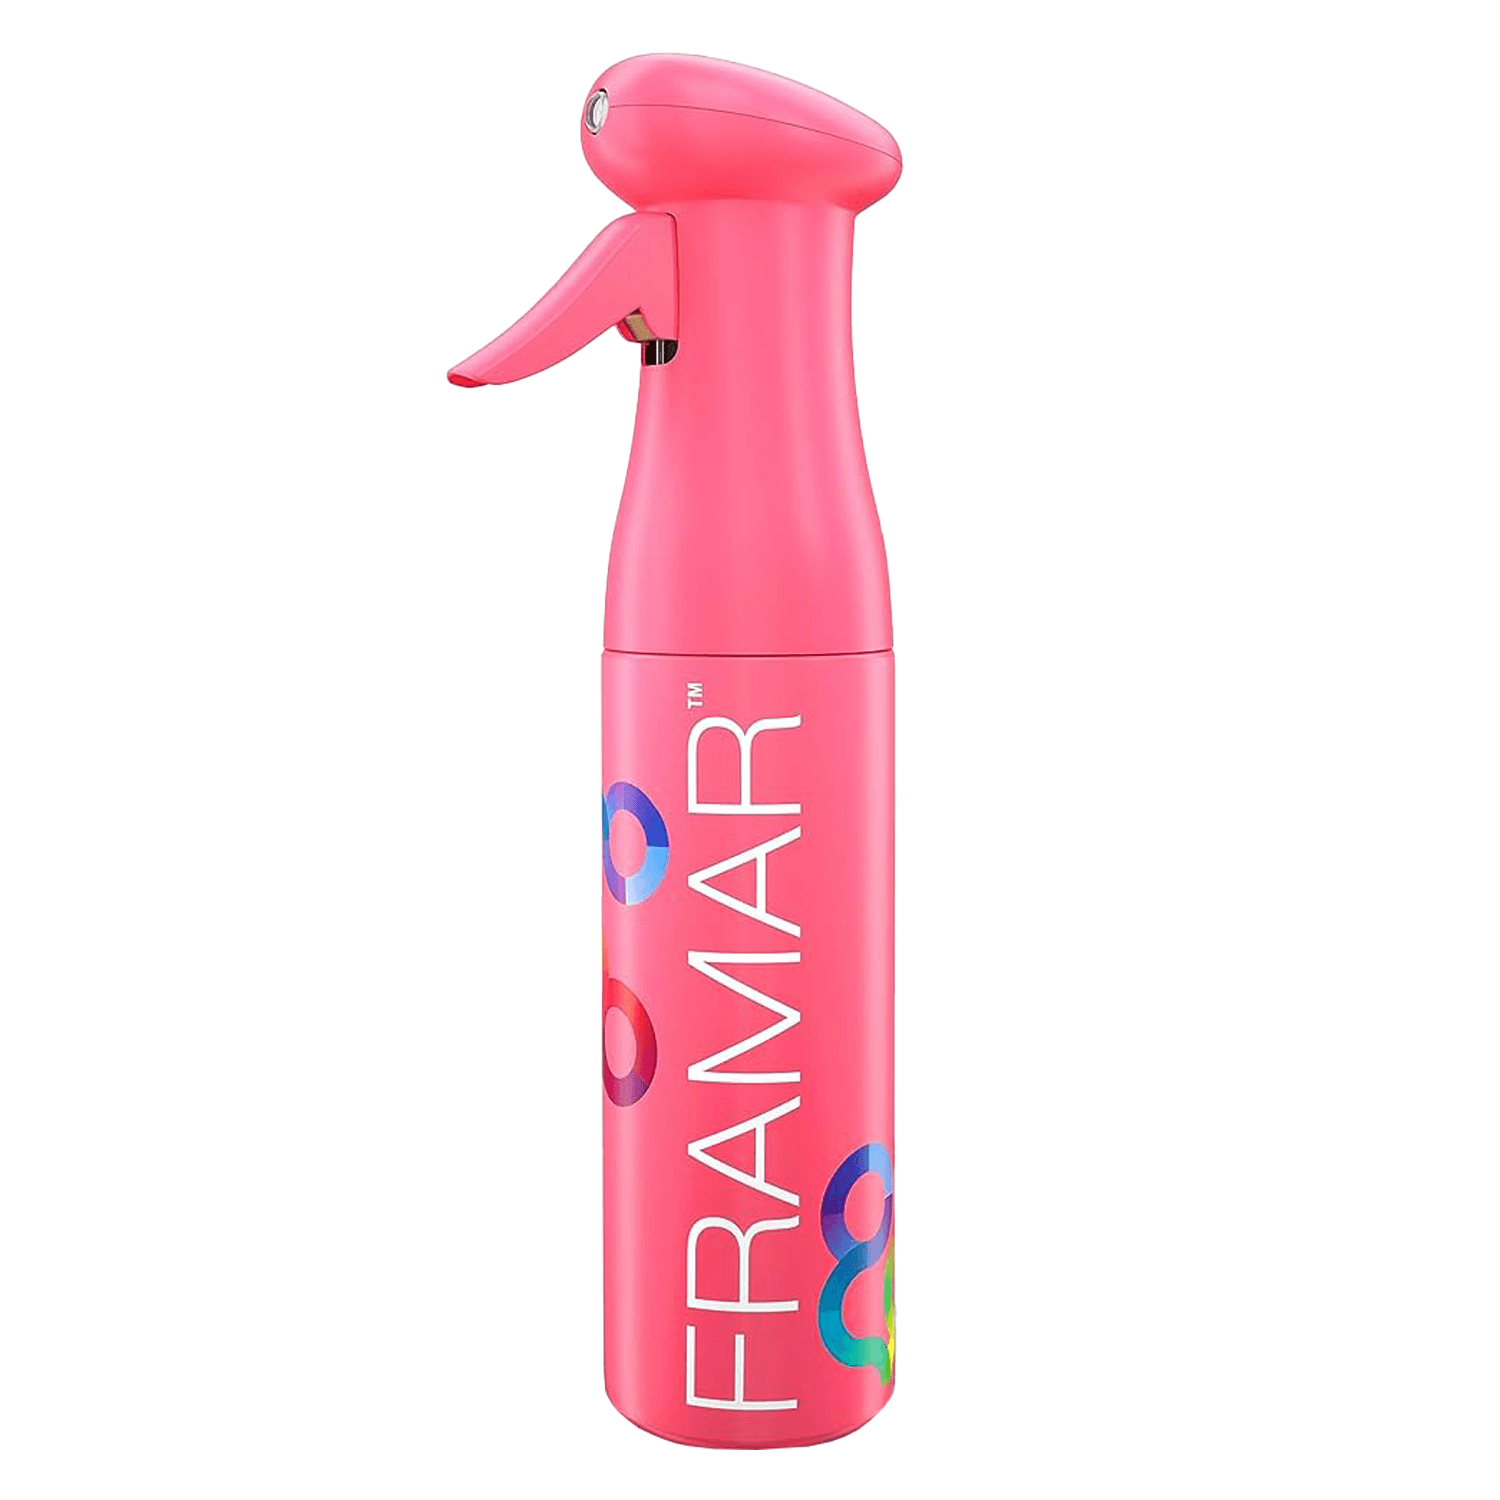 Product image from Framar - Myst Assist Spray Bottle Pink